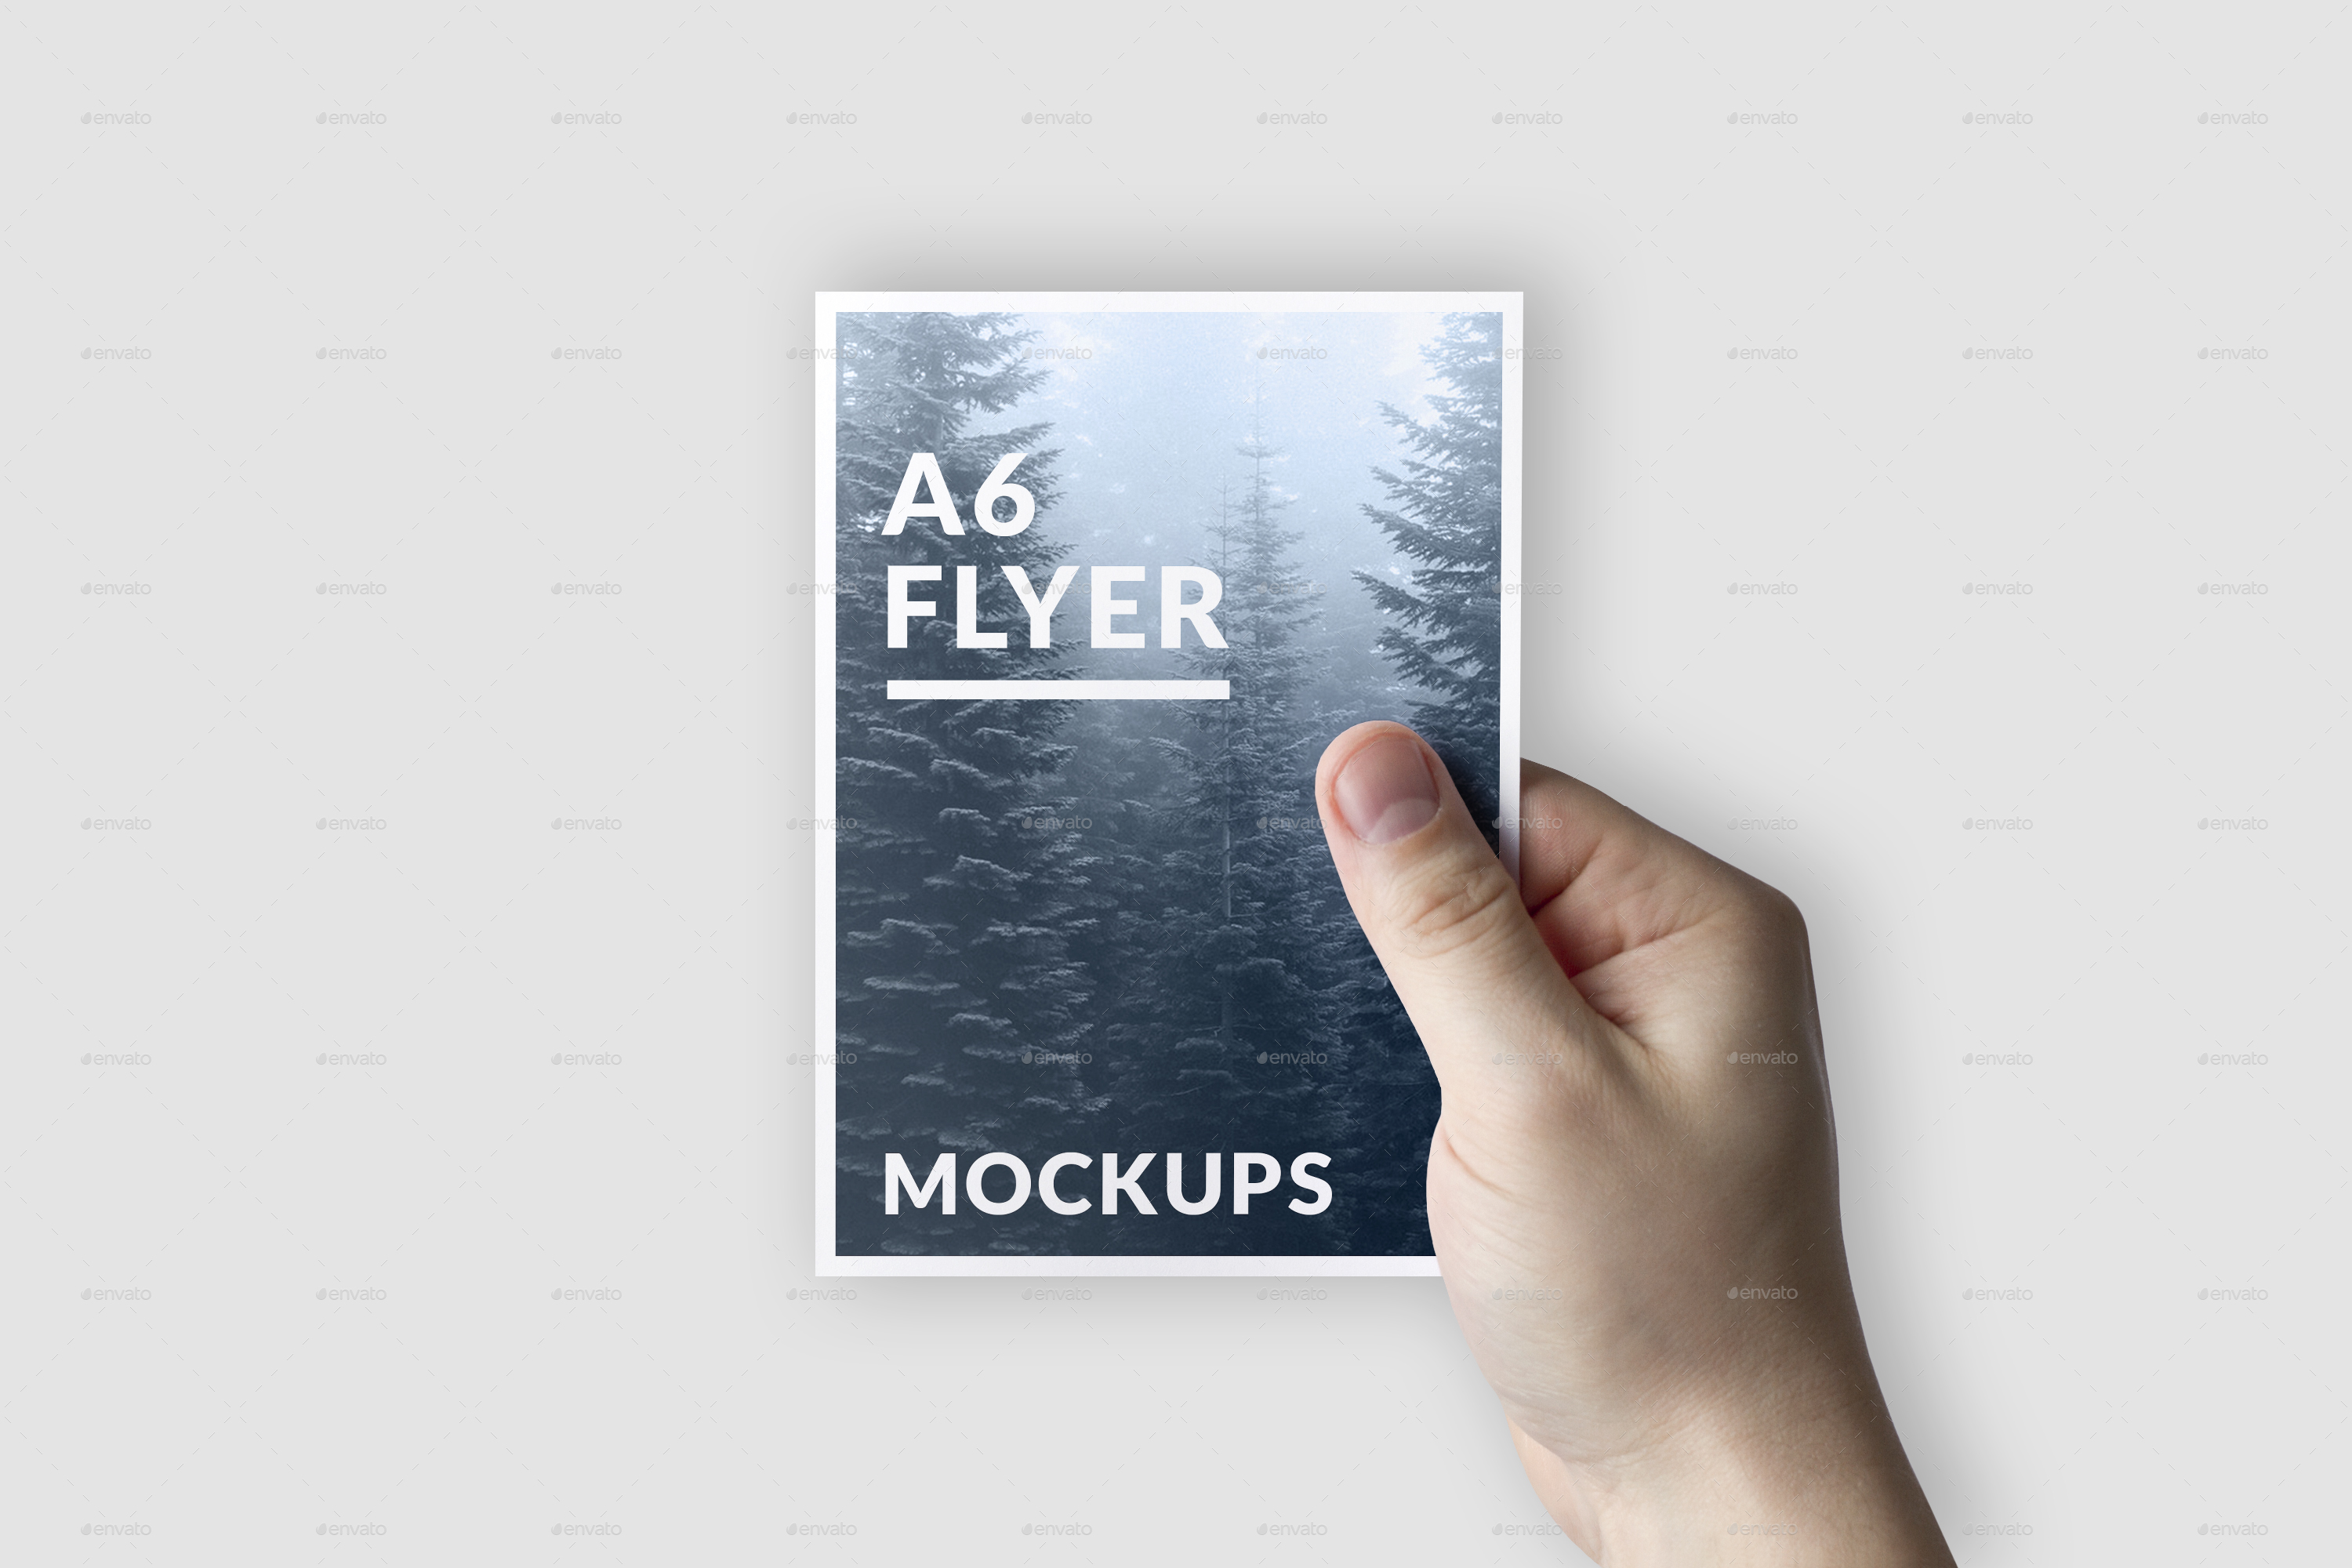 Download A6 Flyer Mockups by MintMockups | GraphicRiver